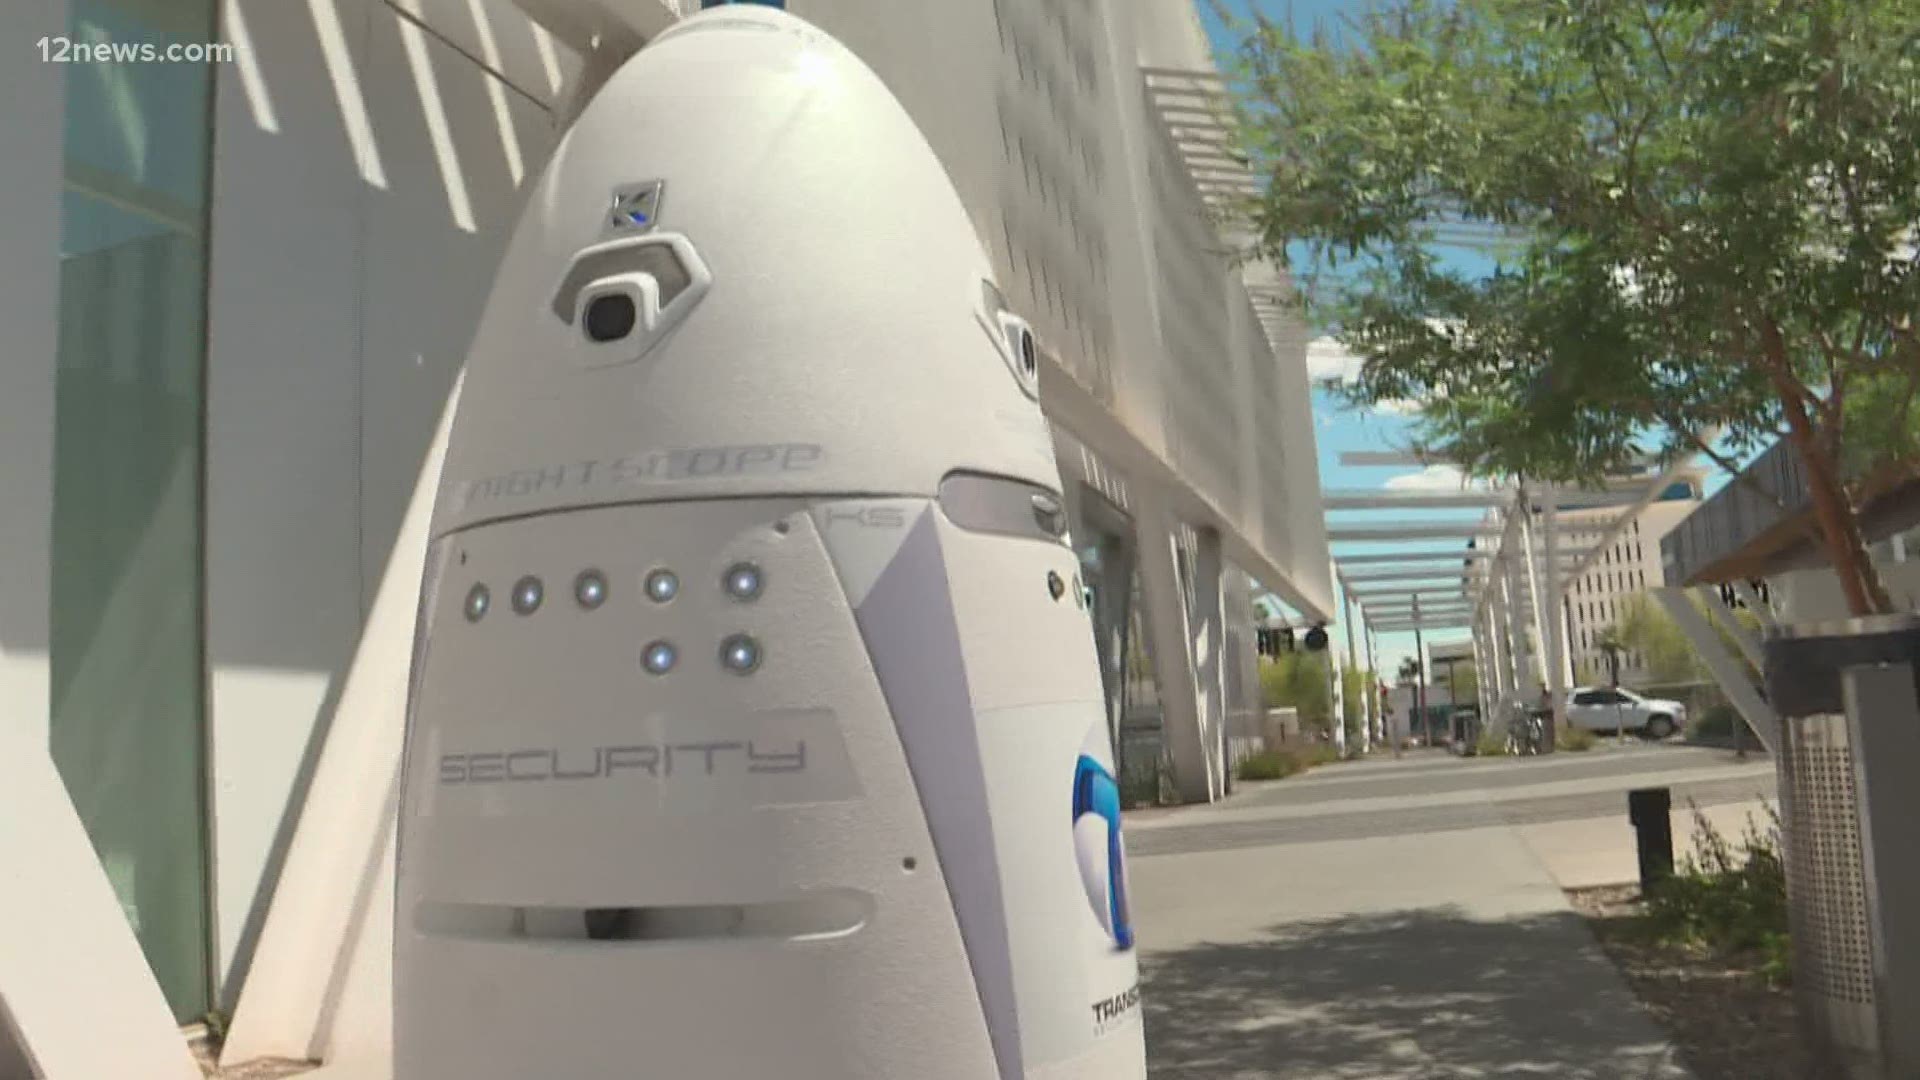 There's a new edition to the security staff at Park Central Mall in Phoenix. A robot security guard named Parker is now patrolling the property.